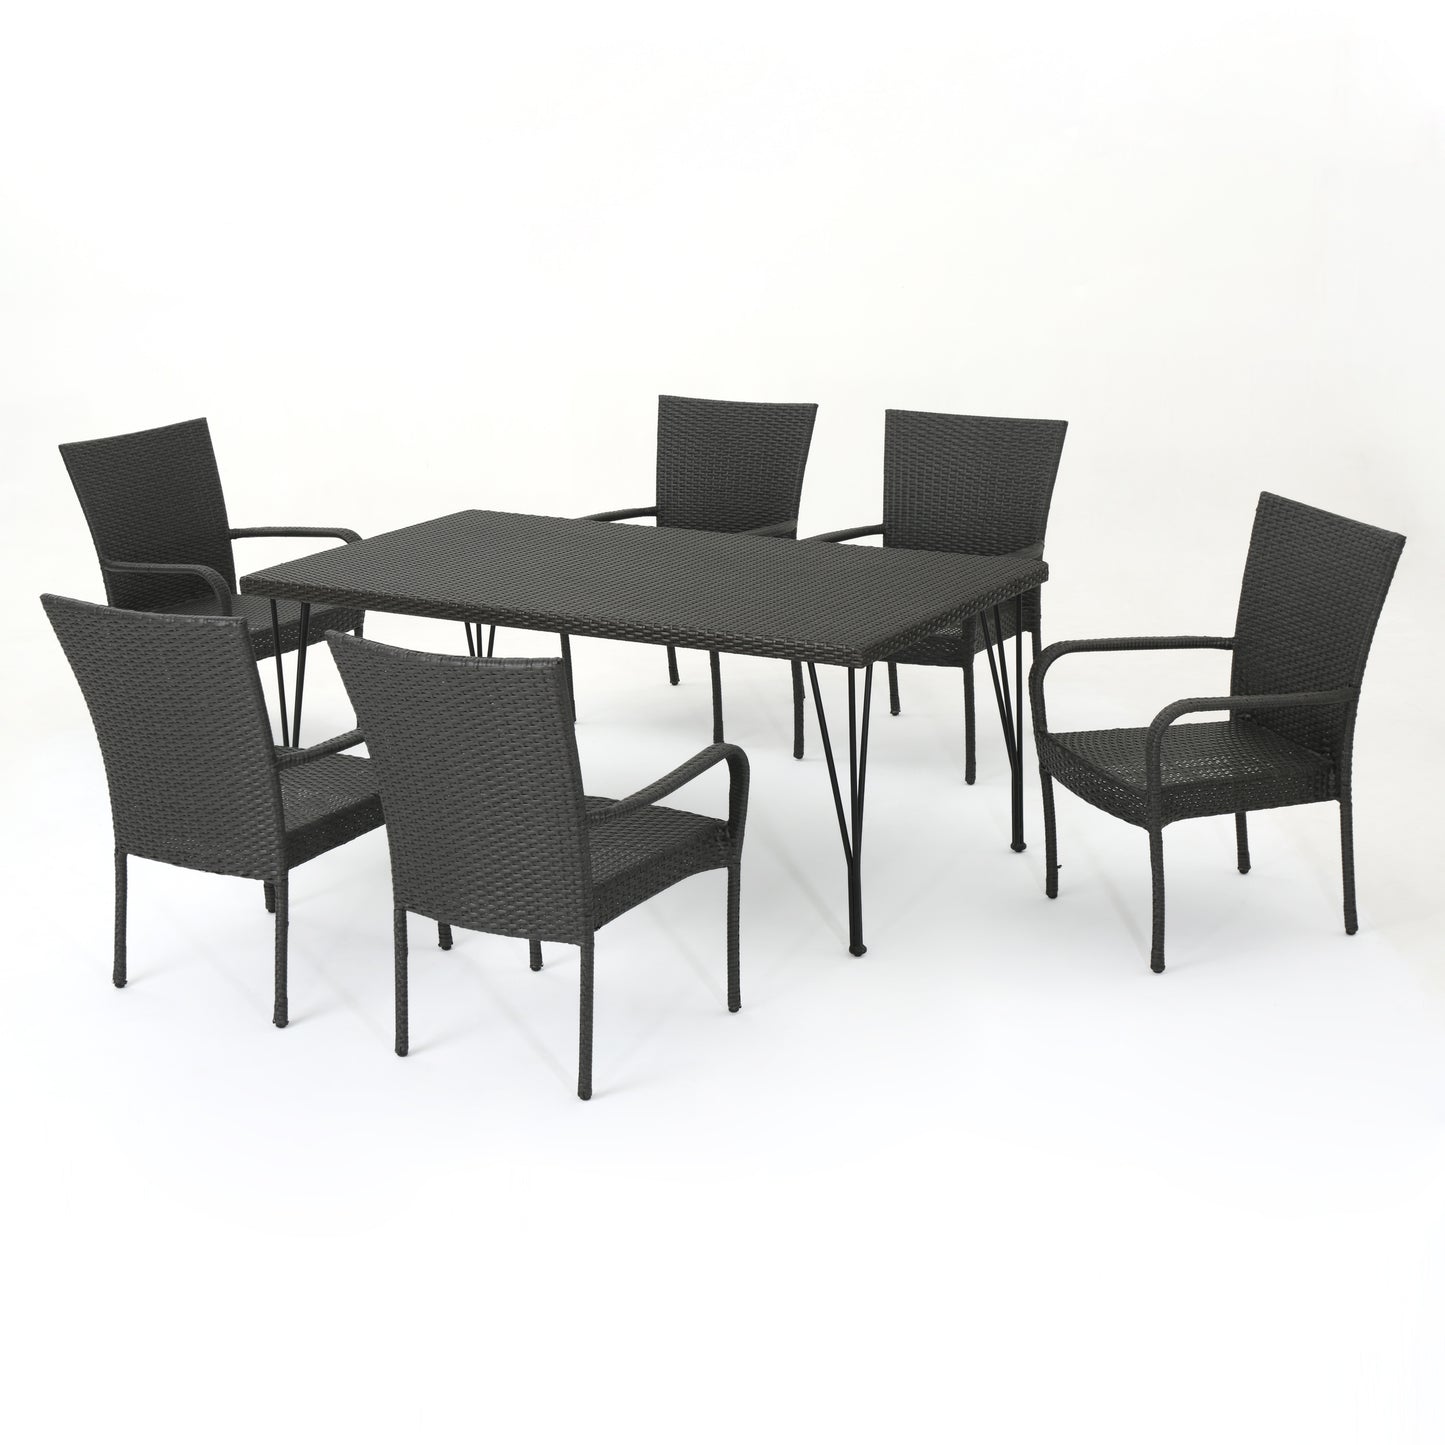 Nash Outdoor 7 Piece Gray Wicker Rectangular Dining Set with Stacking Chairs